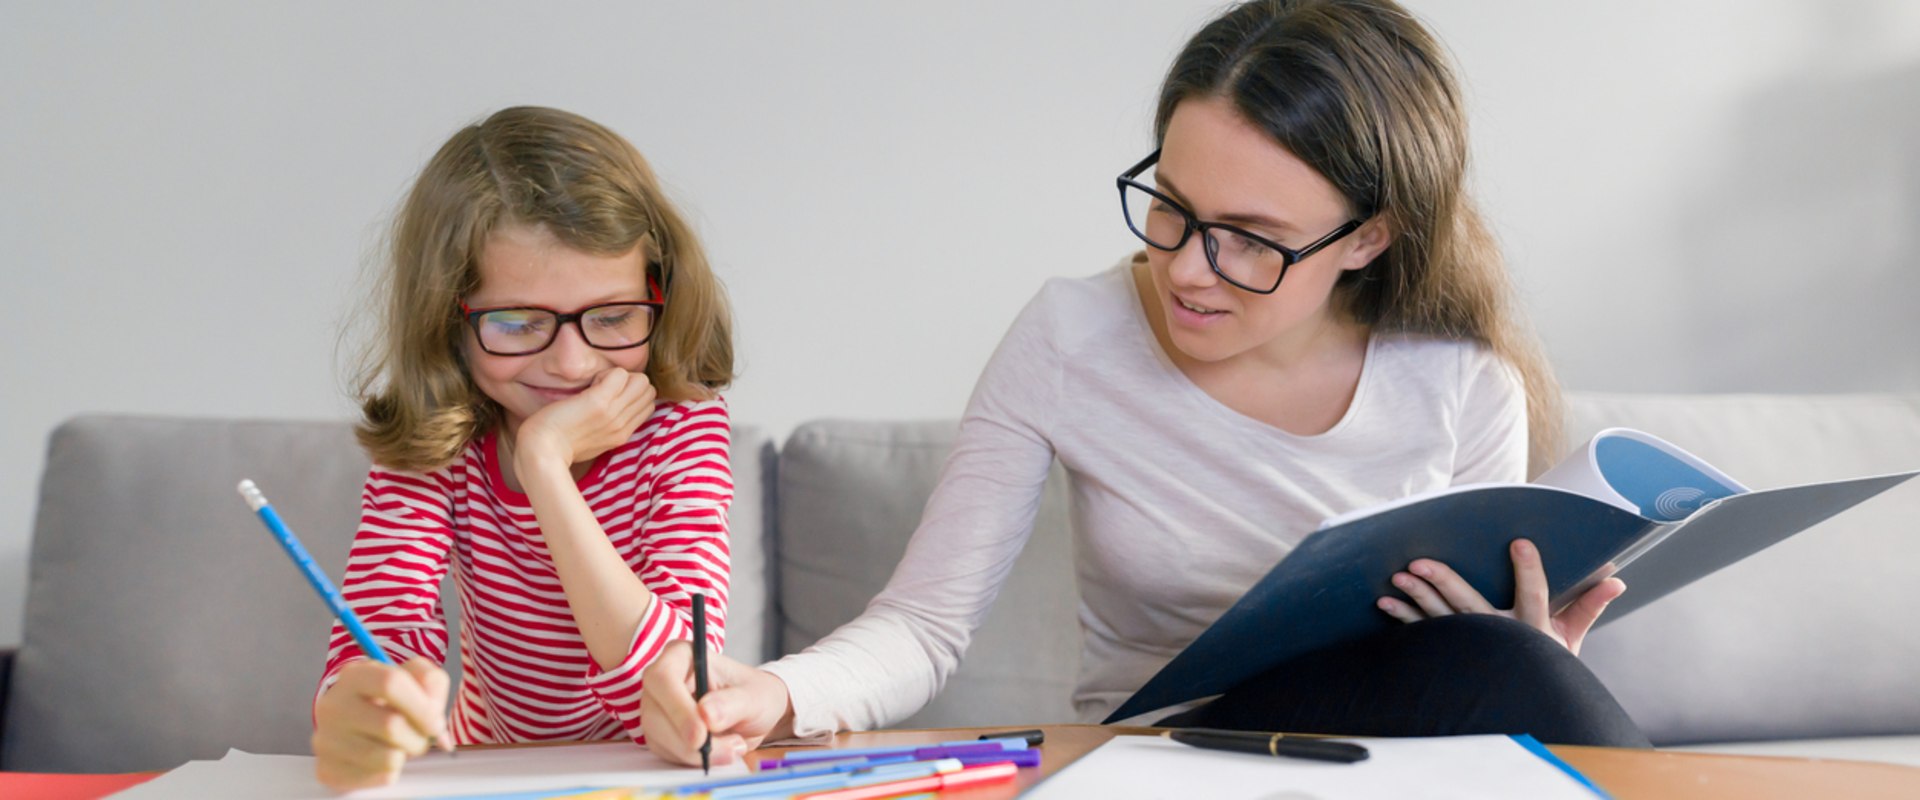 5 Signs That Your Child Needs Tutoring